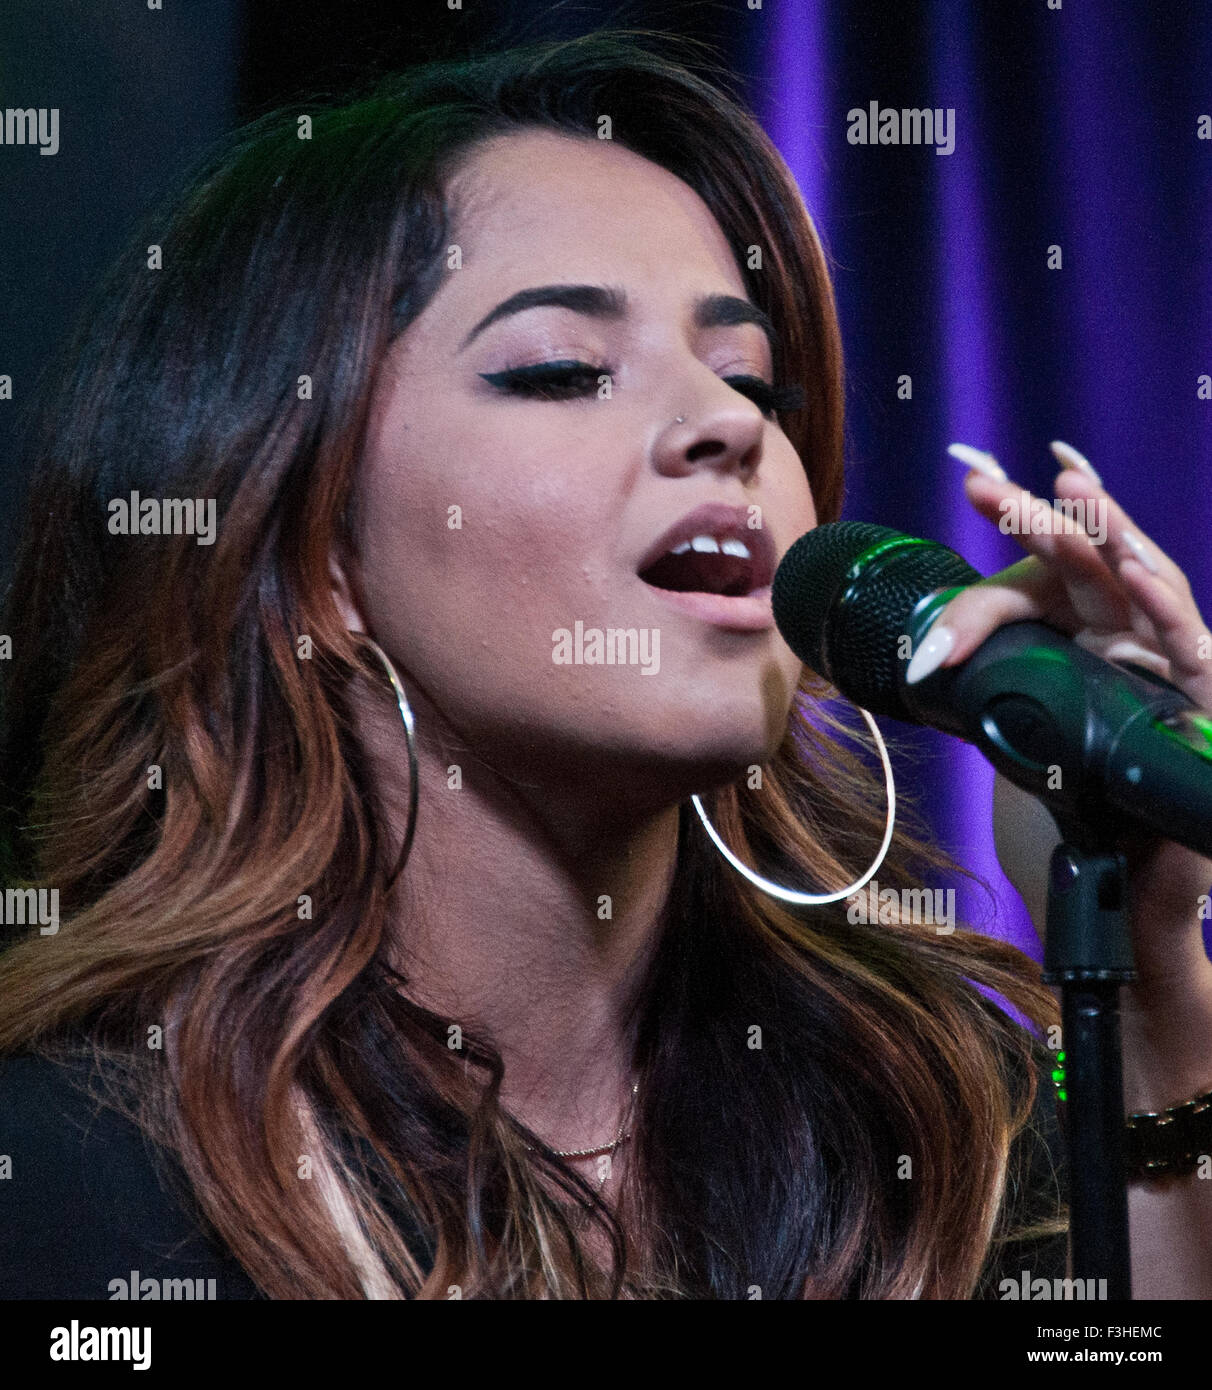 Bala Cynwyd, Pennsylvania, USA. 30th September, 2015. American Singer-Songwriter Becky G Performs at Q102's Performance Theatre  Stock Photo